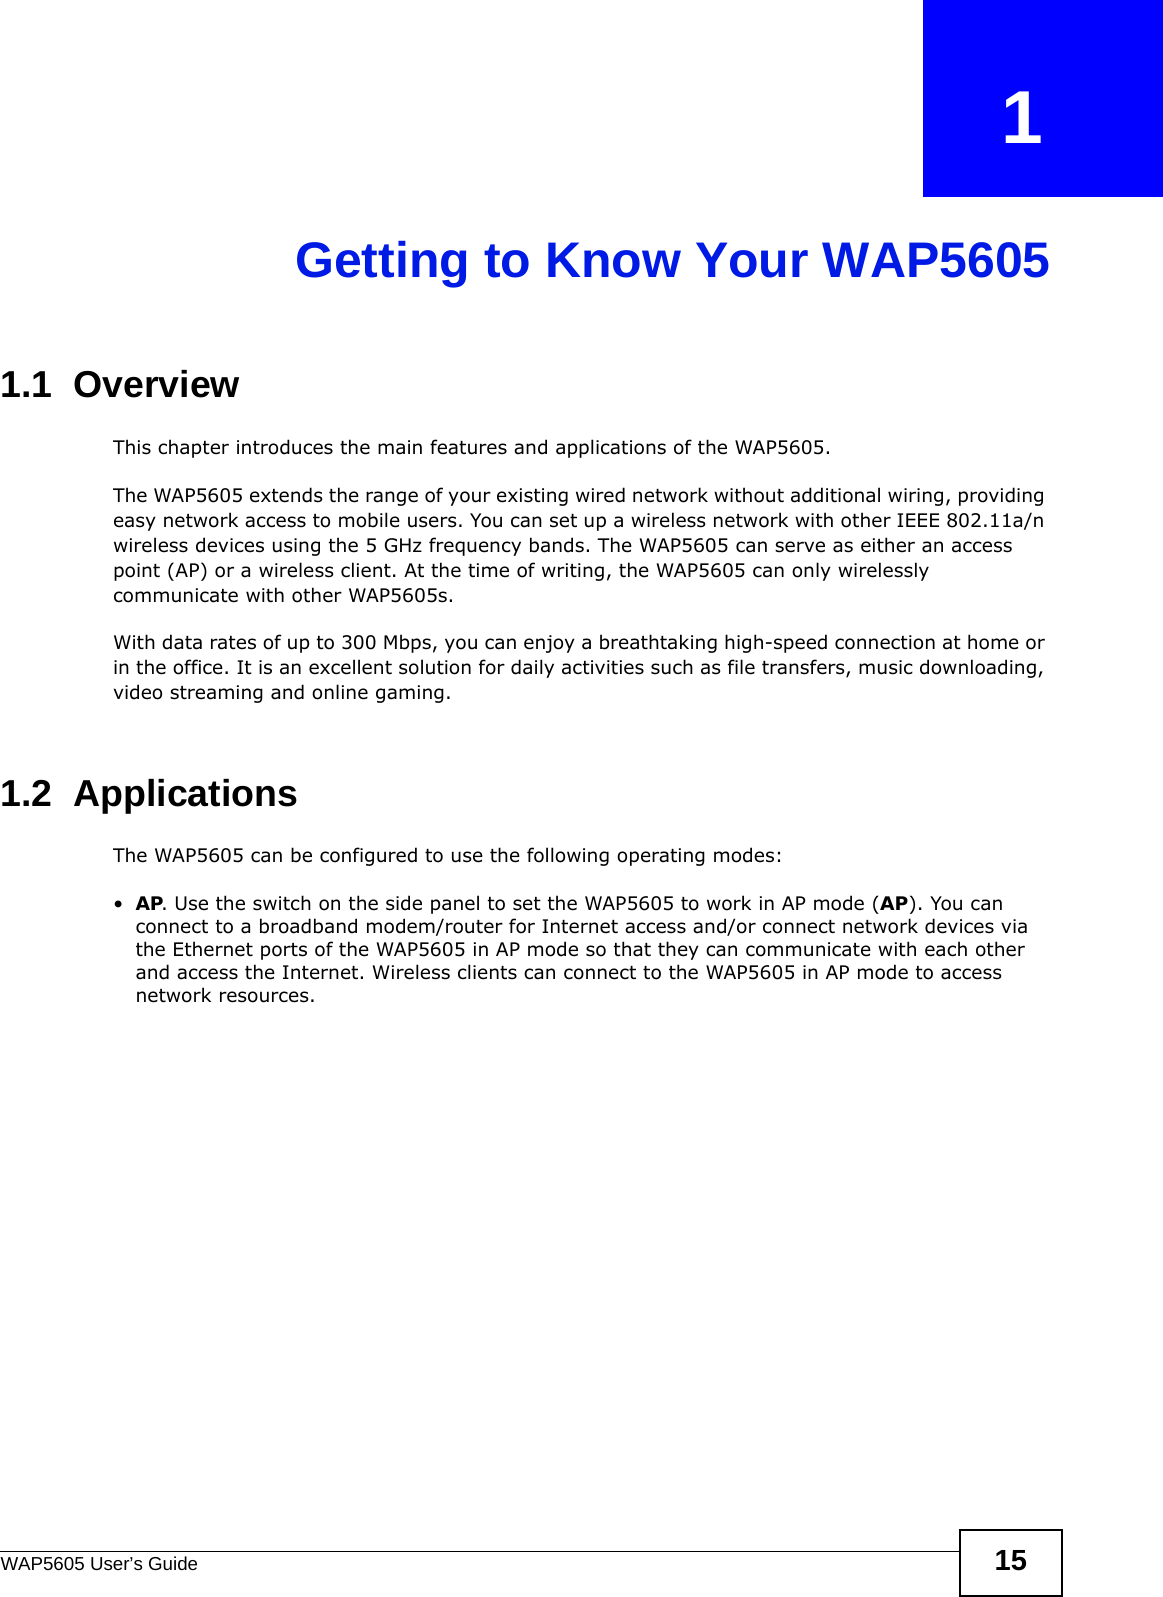 WAP5605 User’s Guide 15CHAPTER   1Getting to Know Your WAP56051.1  Overview  This chapter introduces the main features and applications of the WAP5605.The WAP5605 extends the range of your existing wired network without additional wiring, providing easy network access to mobile users. You can set up a wireless network with other IEEE 802.11a/n wireless devices using the 5 GHz frequency bands. The WAP5605 can serve as either an access point (AP) or a wireless client. At the time of writing, the WAP5605 can only wirelessly communicate with other WAP5605s.With data rates of up to 300 Mbps, you can enjoy a breathtaking high-speed connection at home or in the office. It is an excellent solution for daily activities such as file transfers, music downloading, video streaming and online gaming.1.2  Applications The WAP5605 can be configured to use the following operating modes:•AP. Use the switch on the side panel to set the WAP5605 to work in AP mode (AP). You can connect to a broadband modem/router for Internet access and/or connect network devices via the Ethernet ports of the WAP5605 in AP mode so that they can communicate with each other and access the Internet. Wireless clients can connect to the WAP5605 in AP mode to access network resources. 